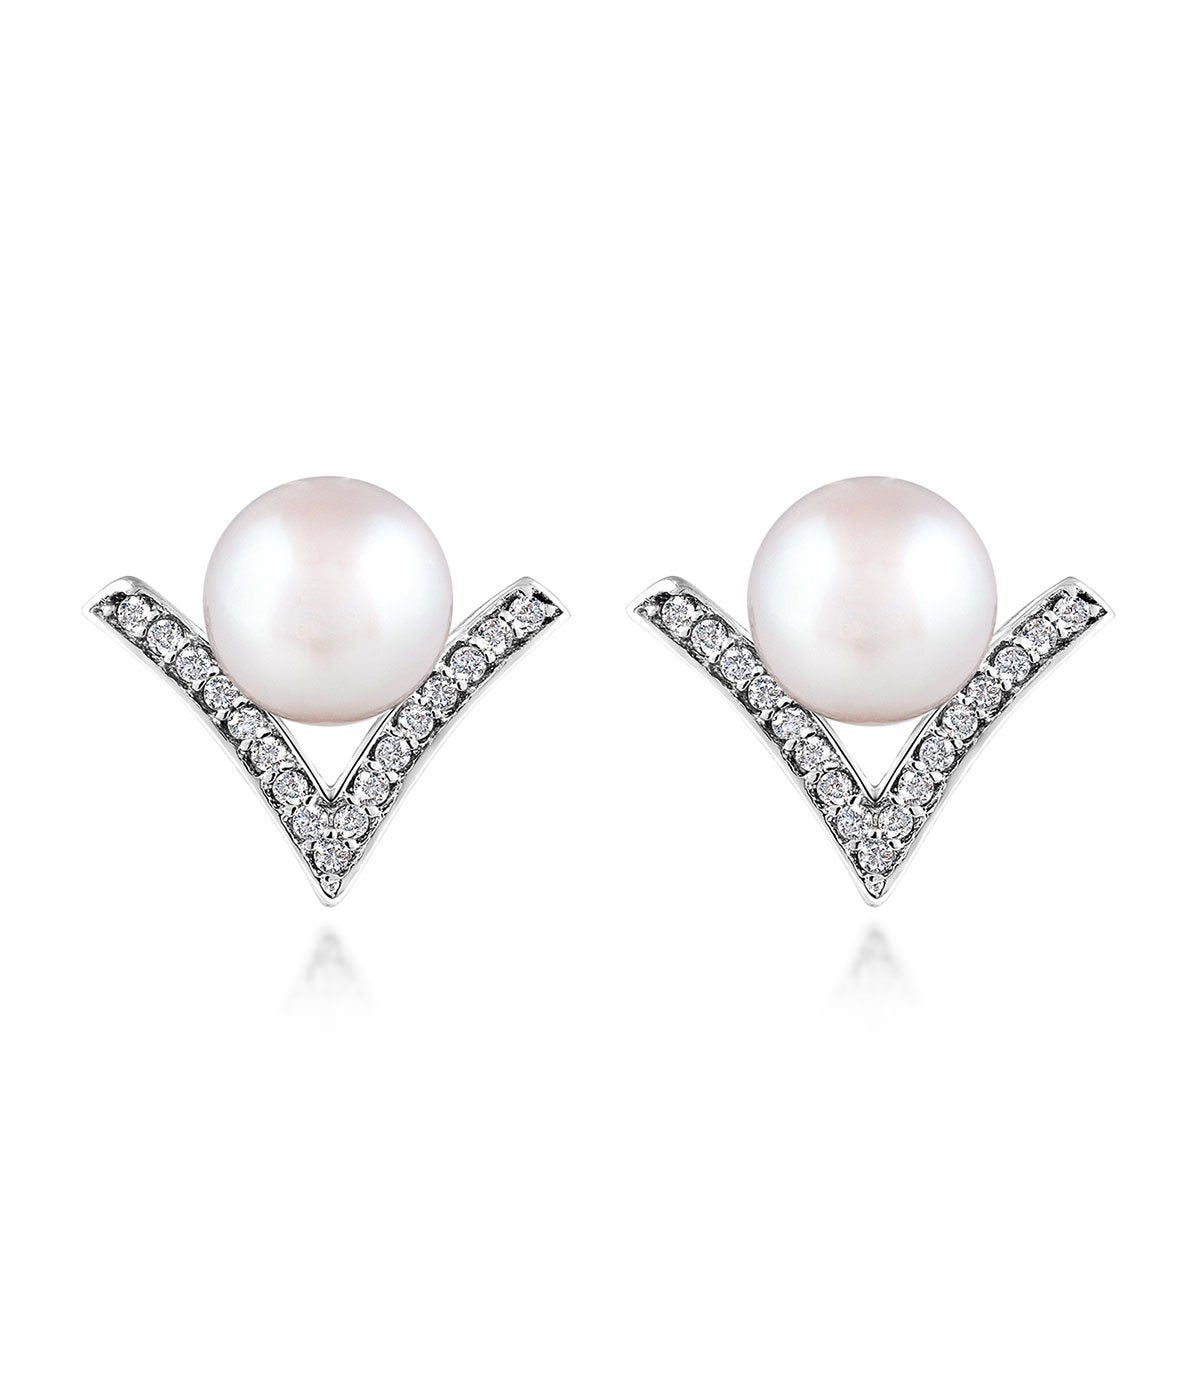 Dew Drop Pearl Stud Earrings in Rhodium Plated Sterling Silver with Cubic Zirconia